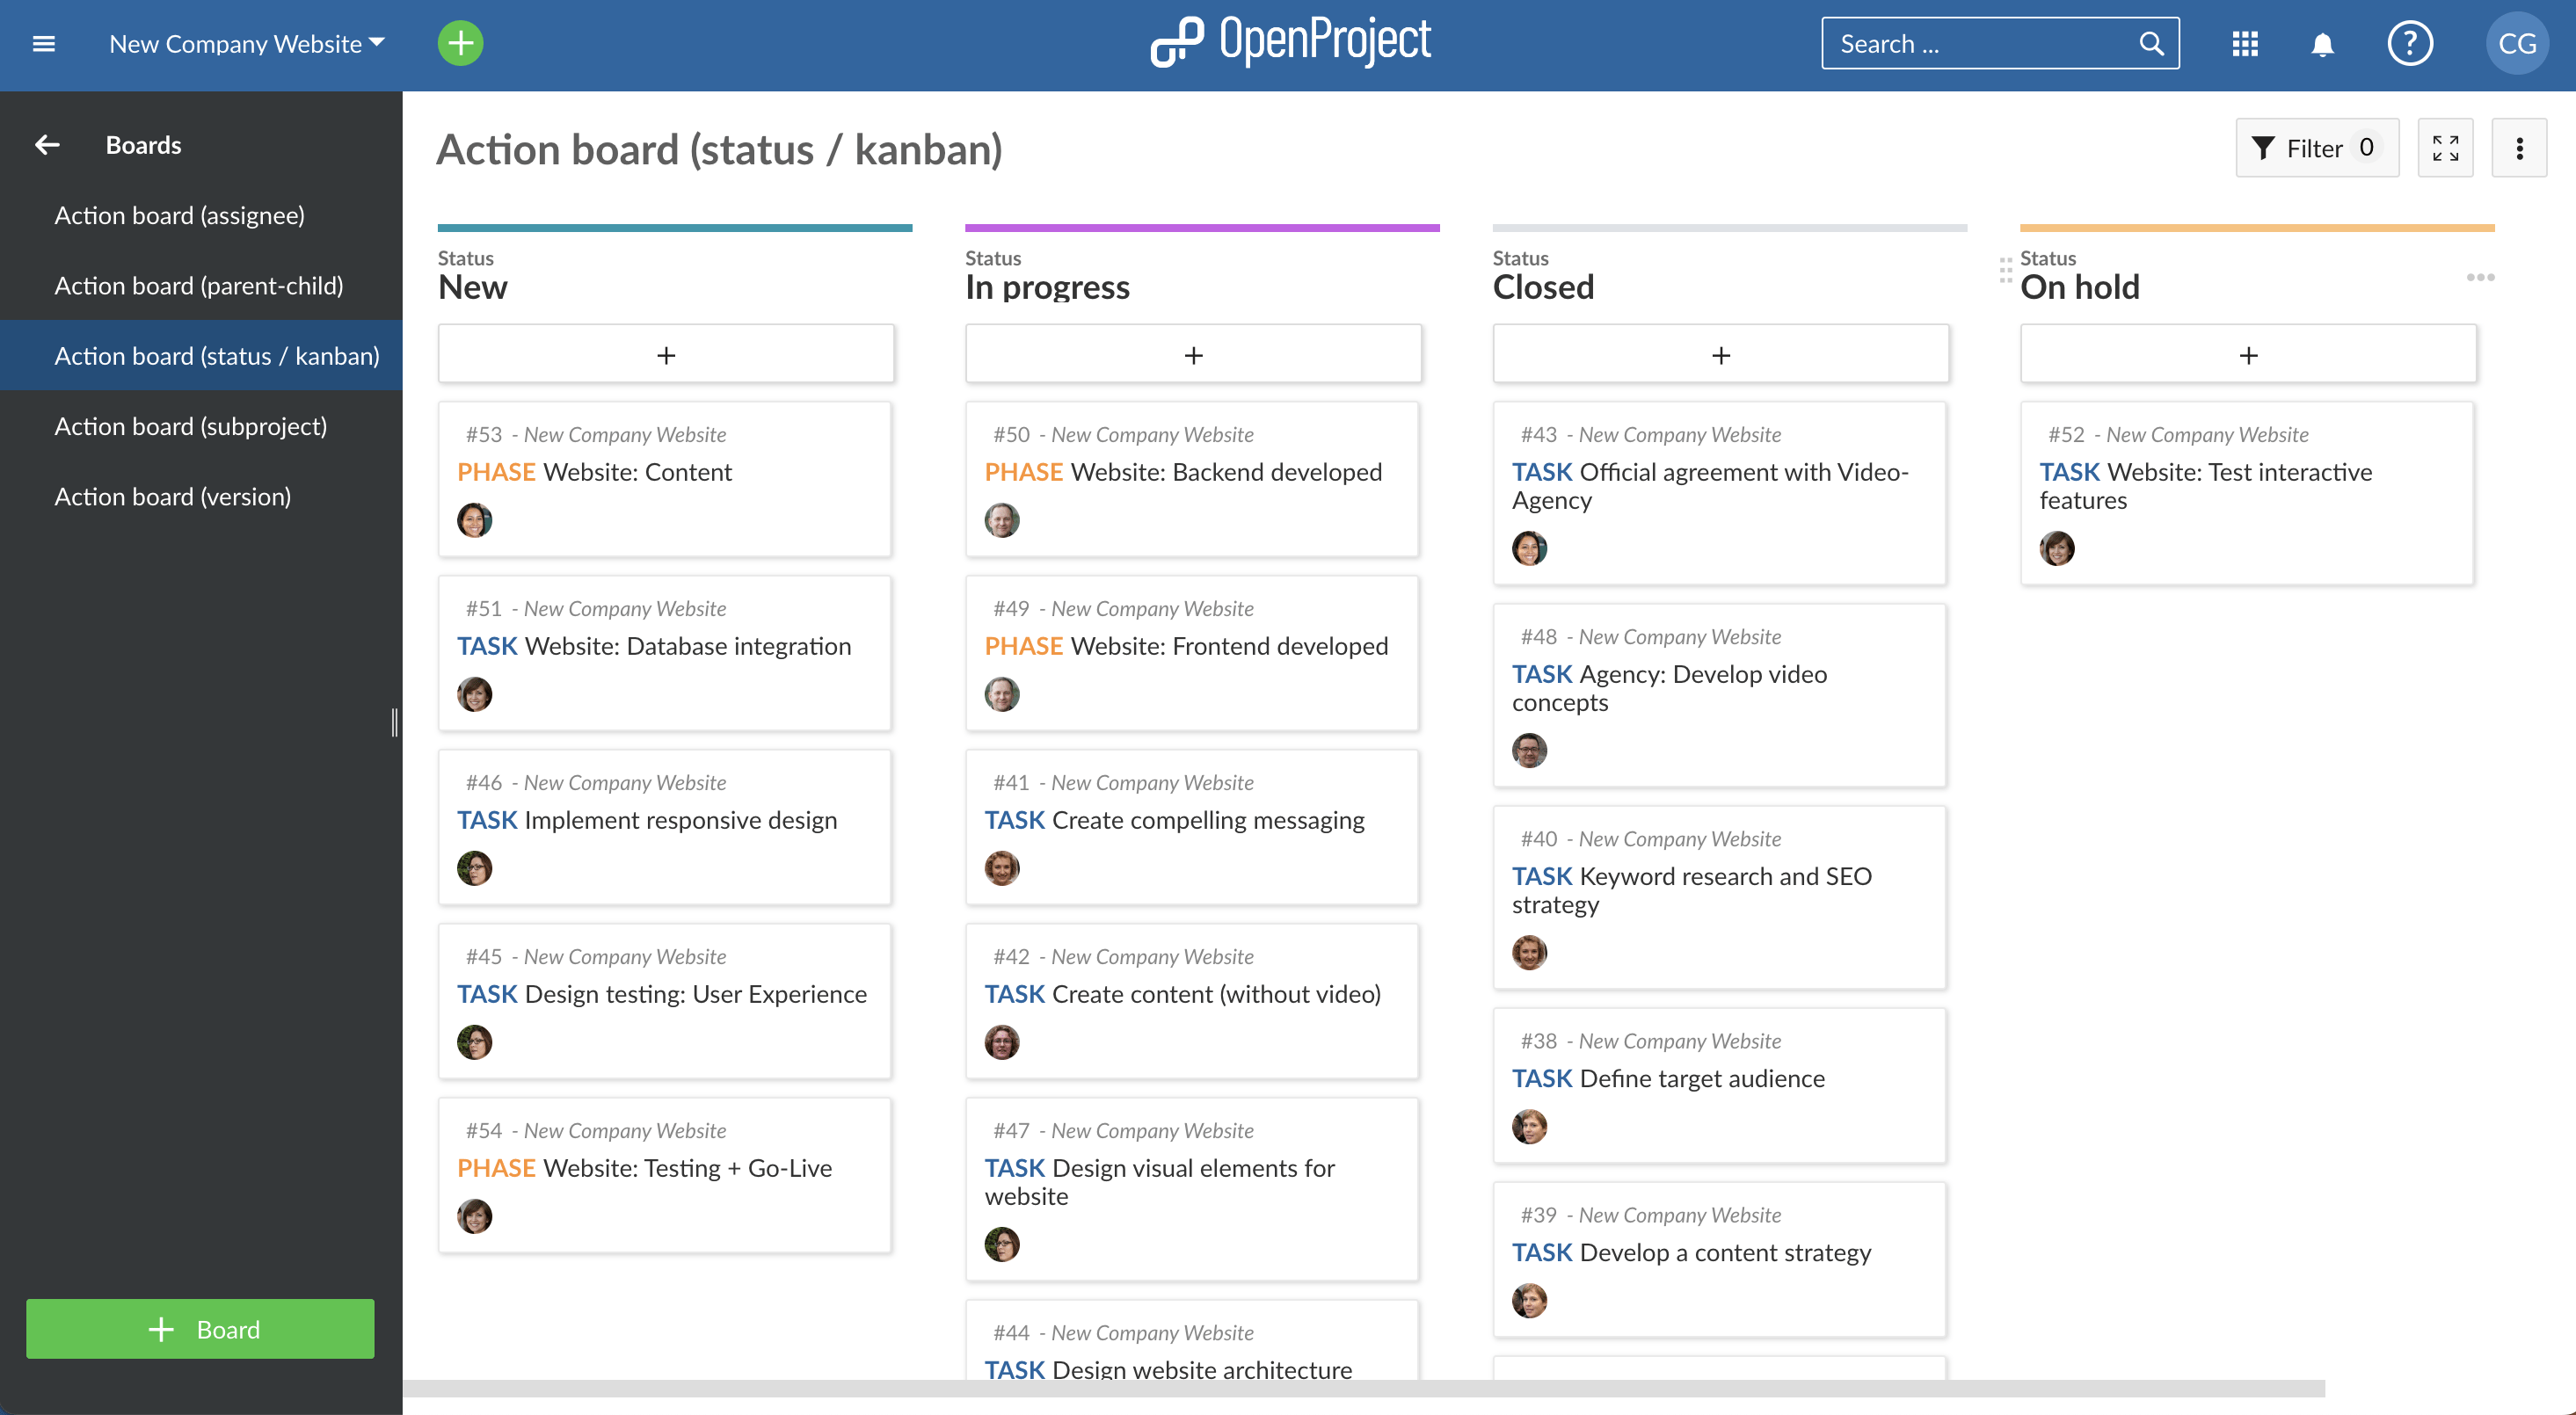 Agile Action Board of type Status